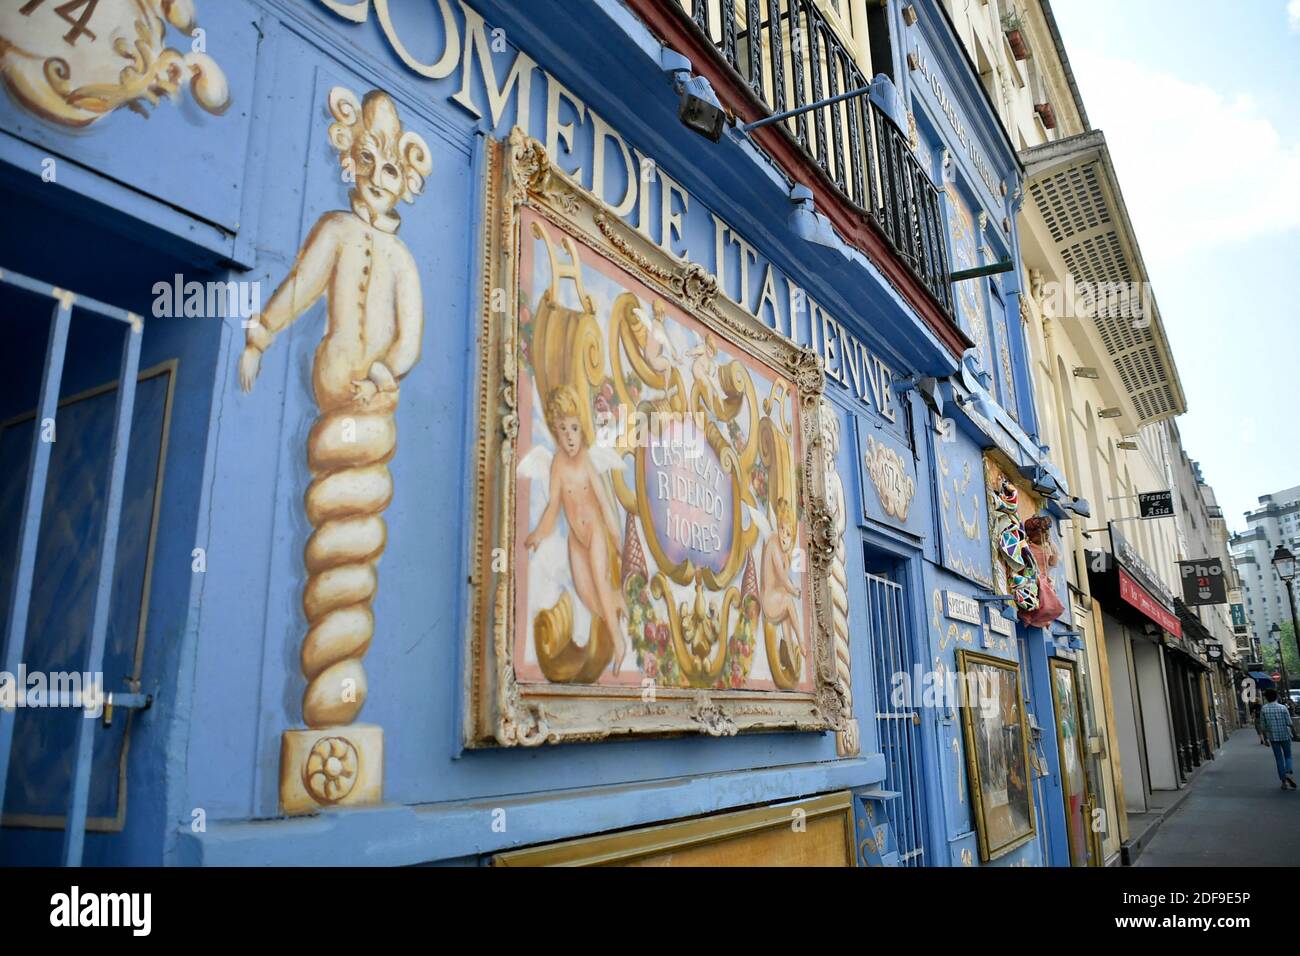 An outside view of the Comedie Italienne playhouse in Paris, France on April 24, 2020. Amid signs of a slowing in the spread of the covid-19 pandemic, the French government is looking to ease nationwide lockdown on May 11, in the hopes of injecting life into the crumbling economy while ensuring people' safety. According to government's guiding policy, cafes, restaurants, cinemas and theatres would remain closed, and festivals would be postponed until mid-July. Photo by Karim Ait Adjedjou/Avenir Pictures/ABACAPRESS.COM Stock Photo